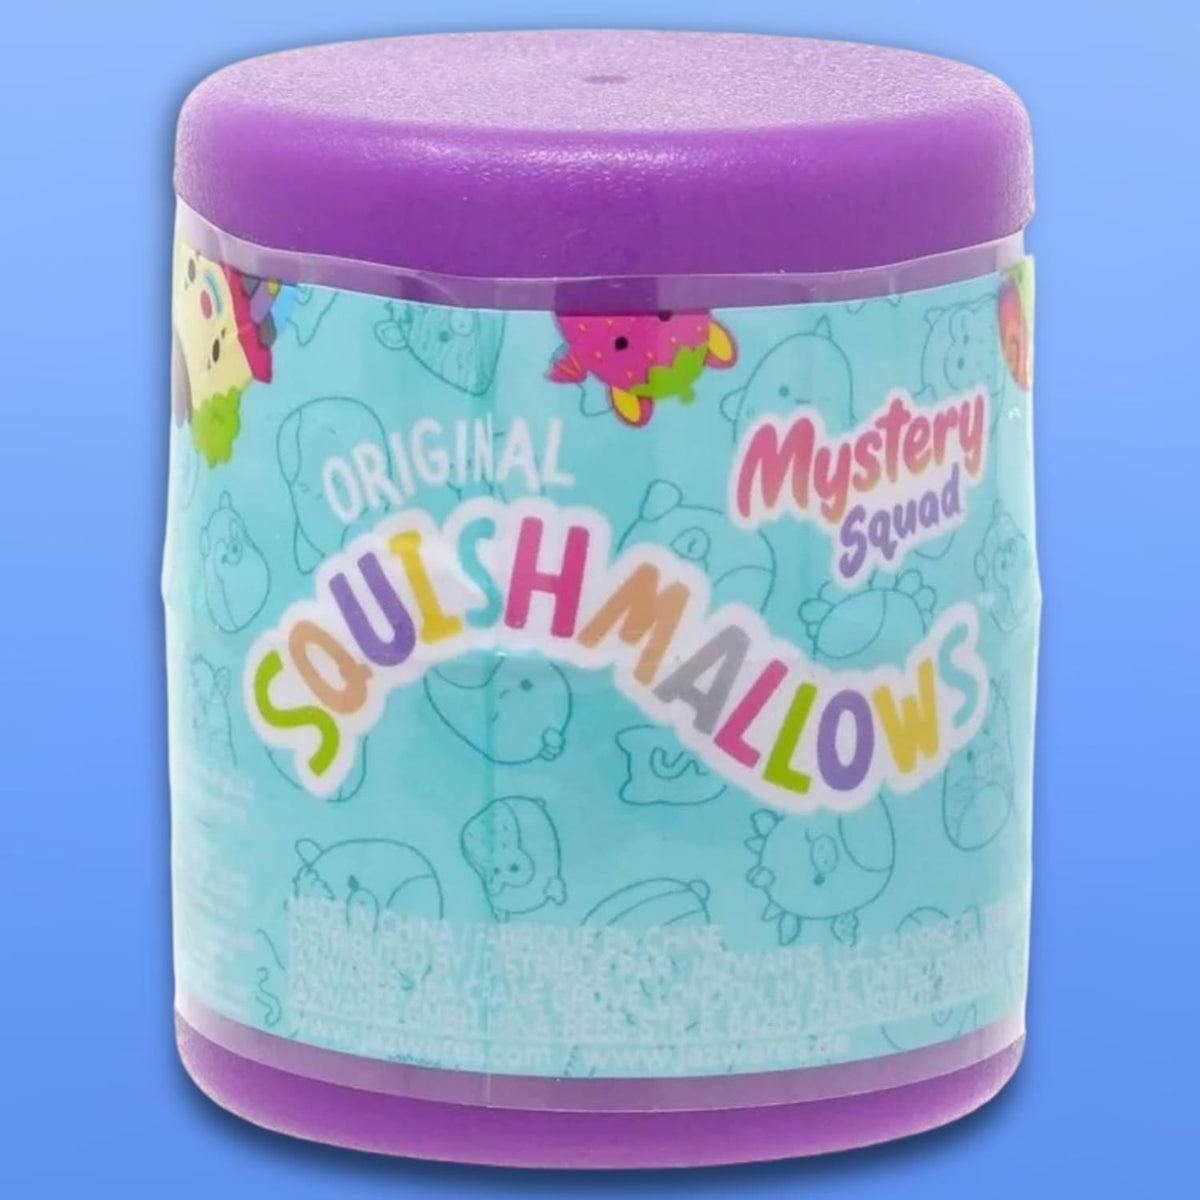 Squishmallows Mystery Squad Micromallows Blind Pack Web0424